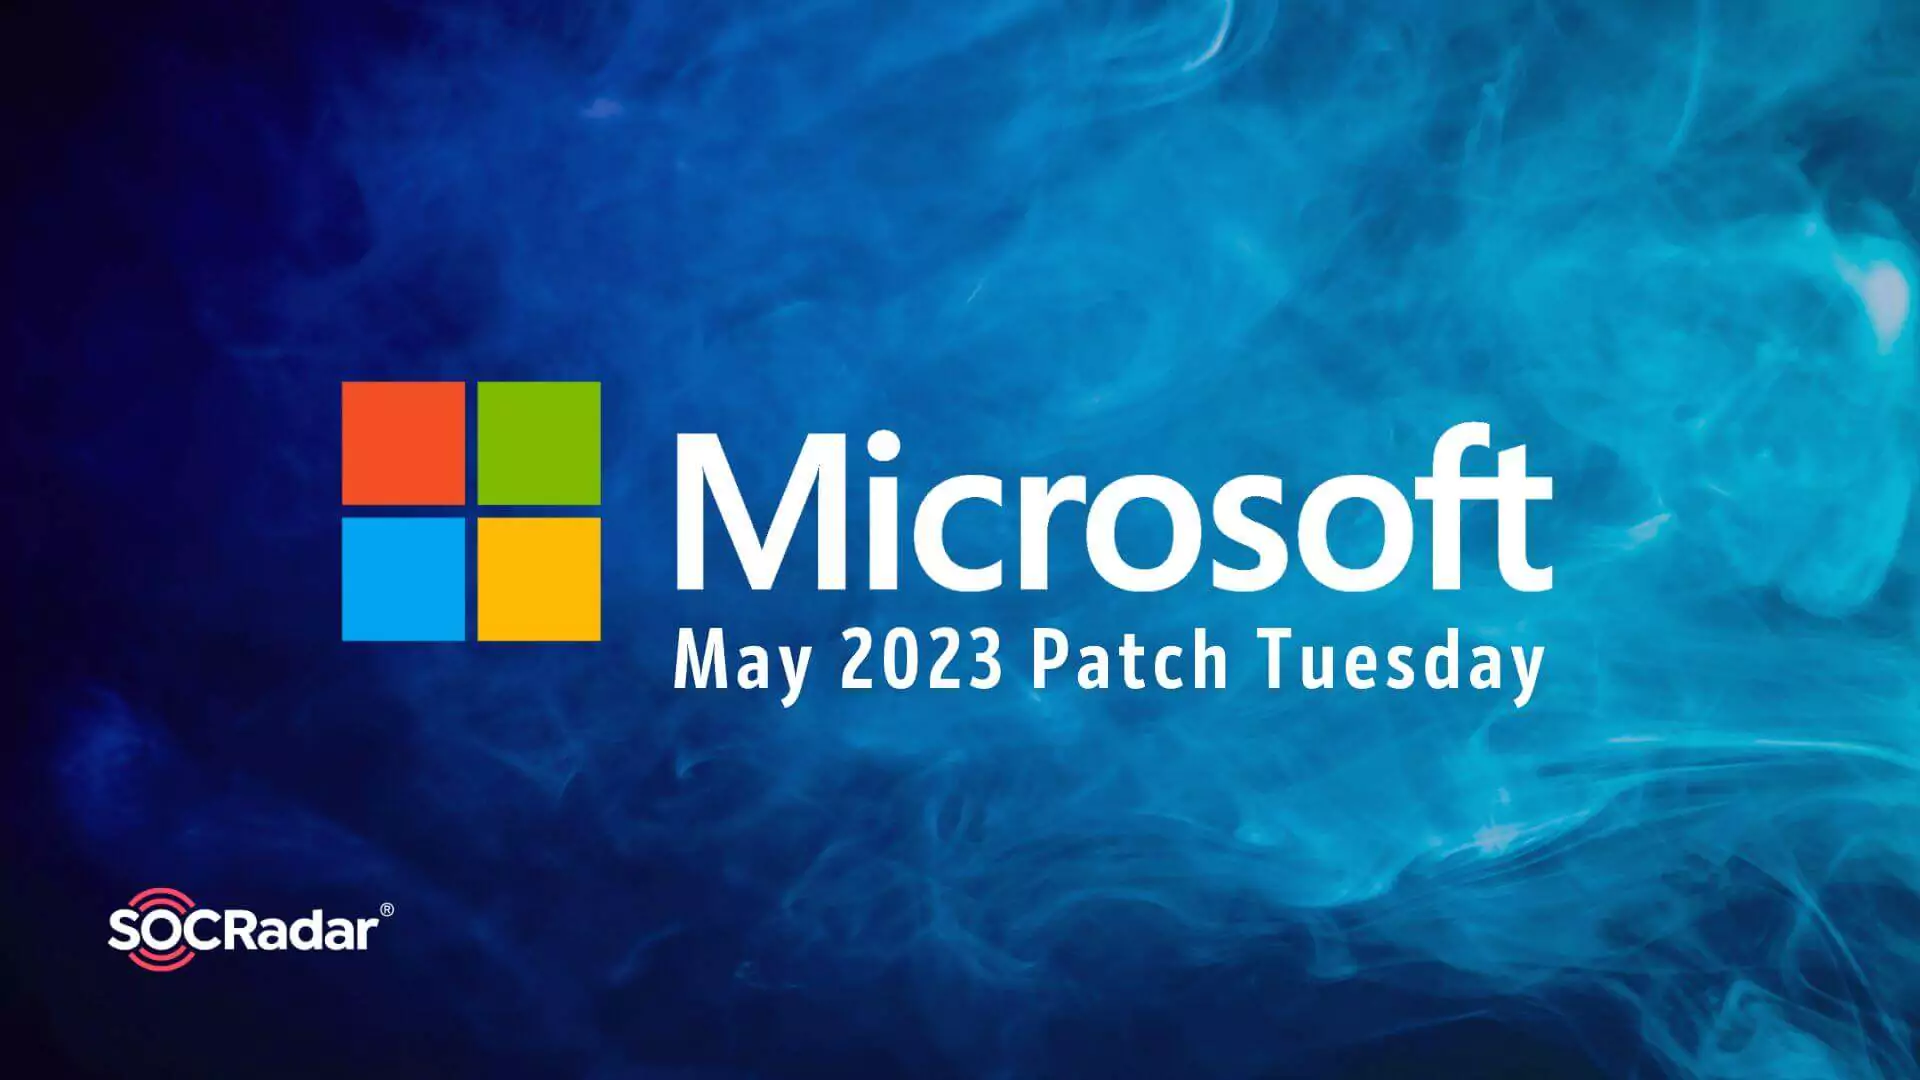 0patch Blog: Micropatches Released For Microsoft Office Security Feature  Bypass (CVE-2023-33150) - Plus a Small 0day